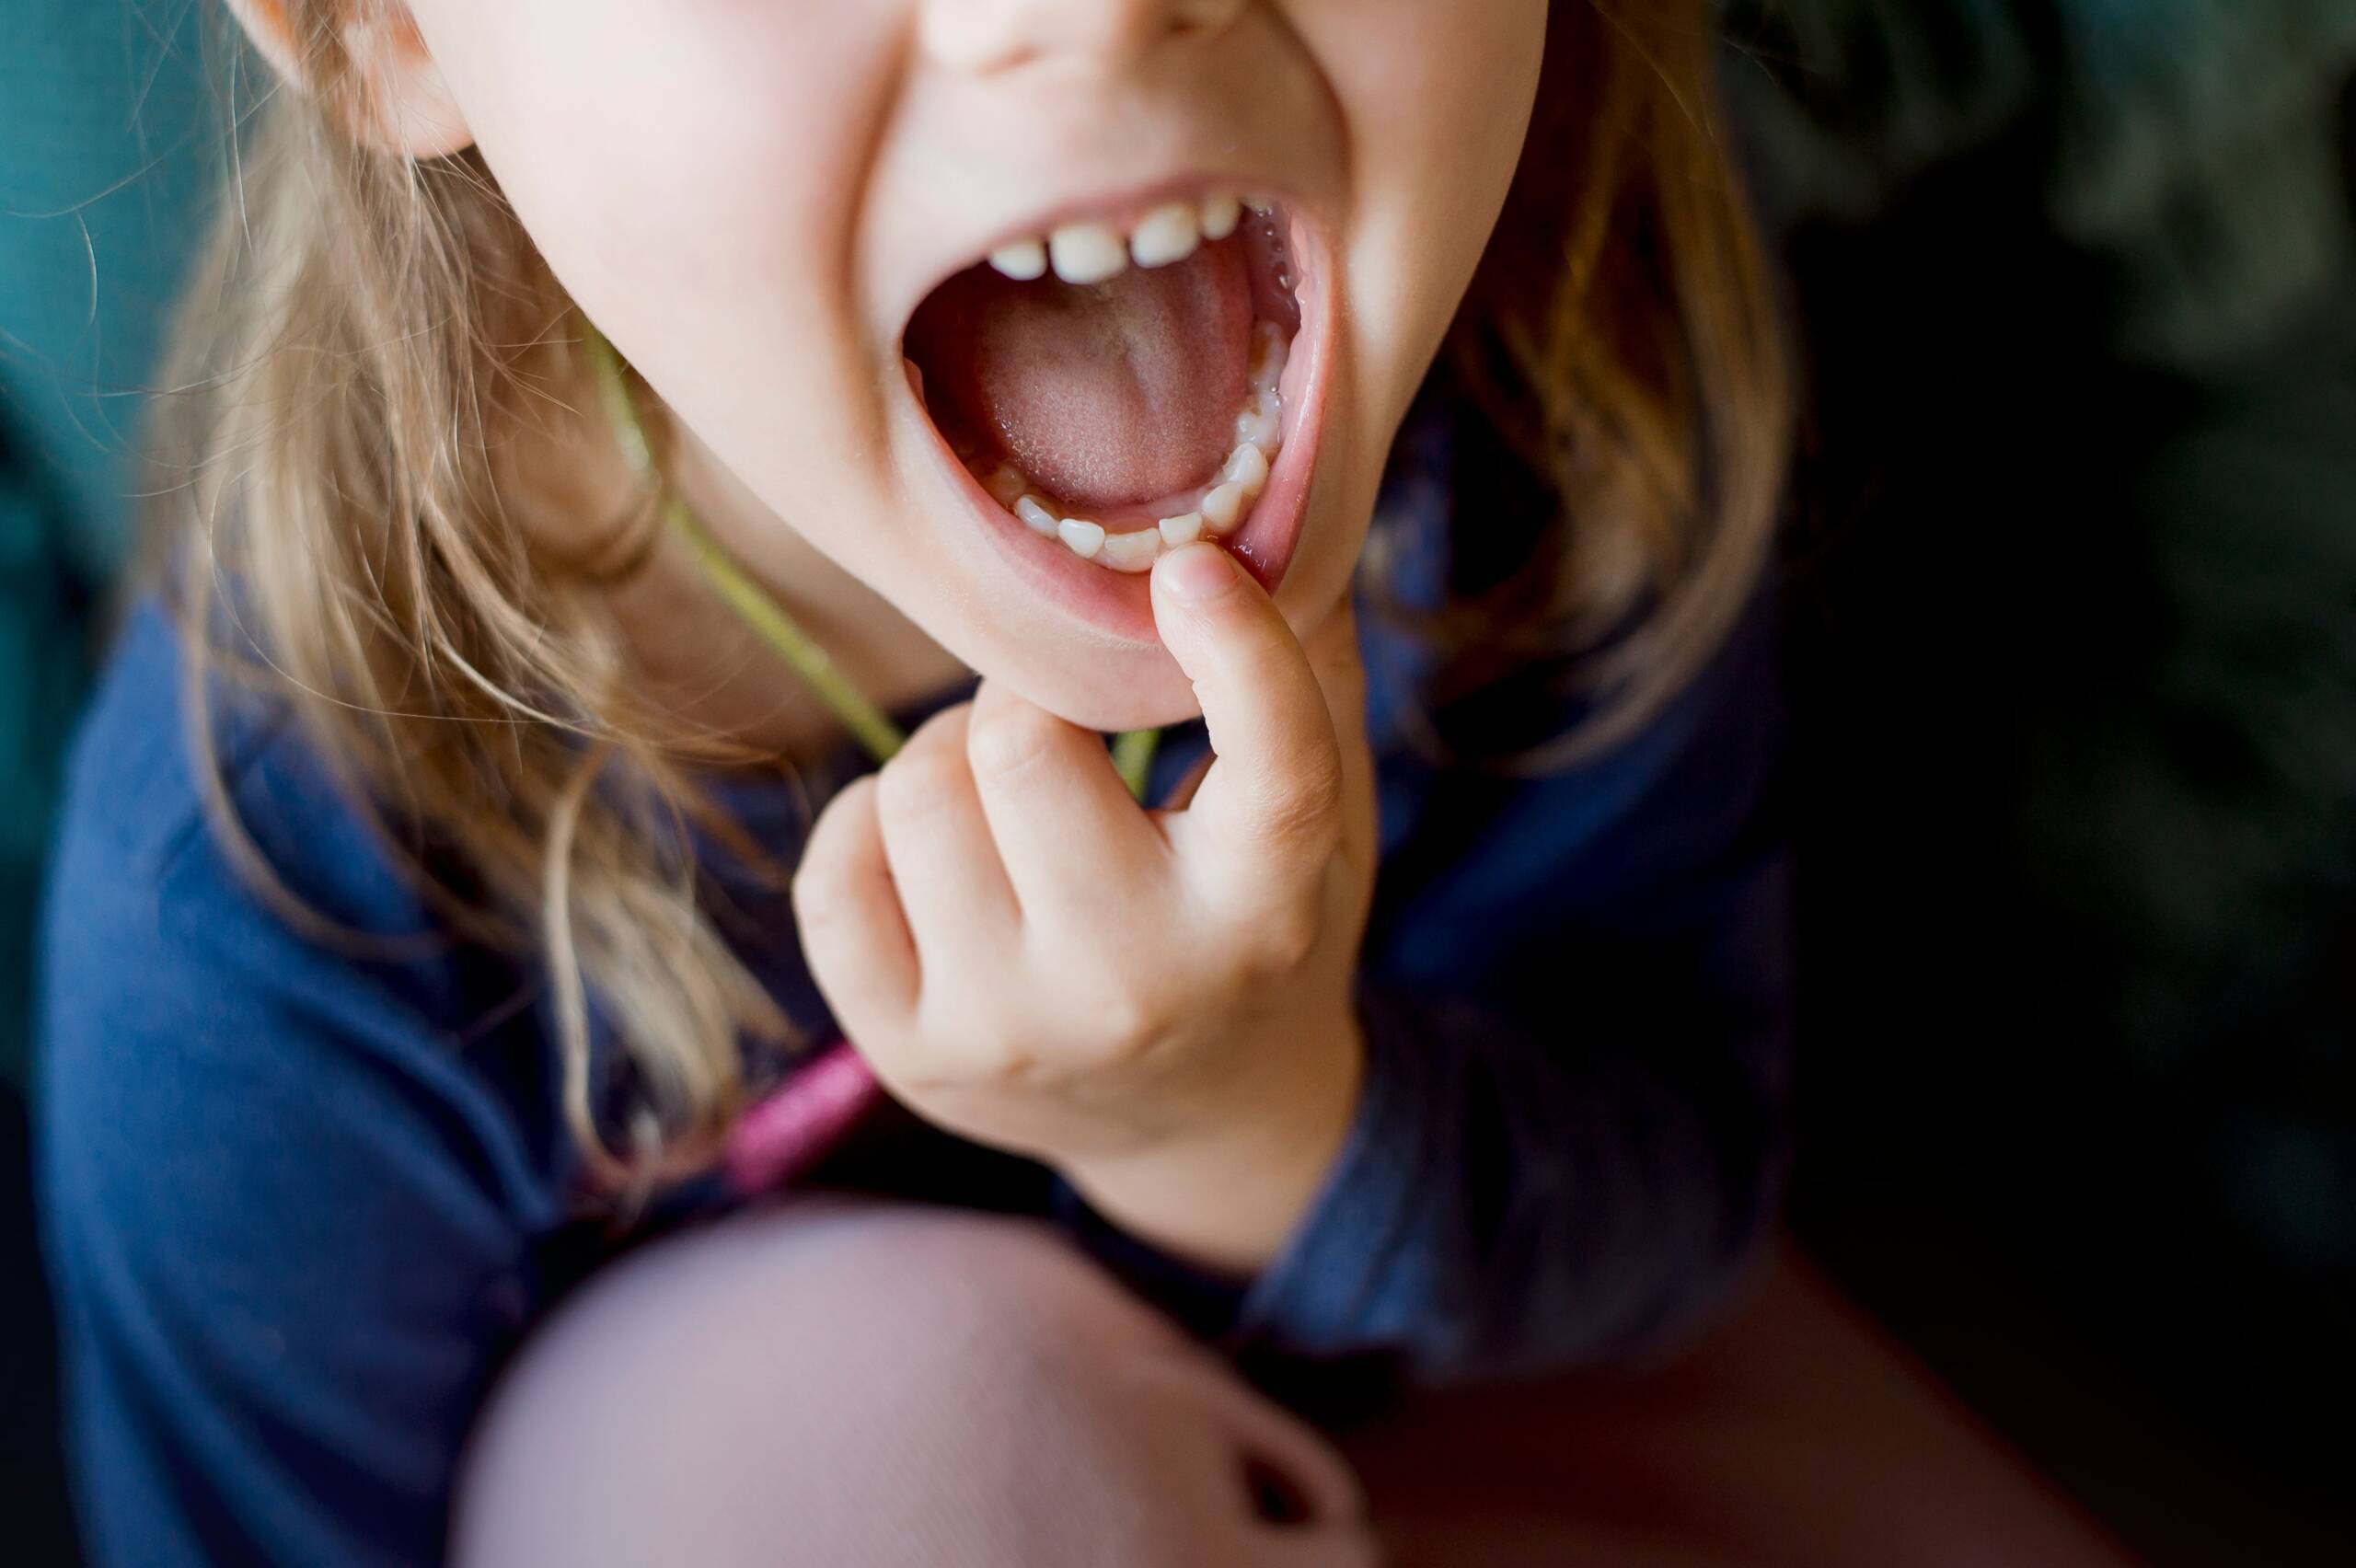 pediatric dentistry patient showing a loose tooth